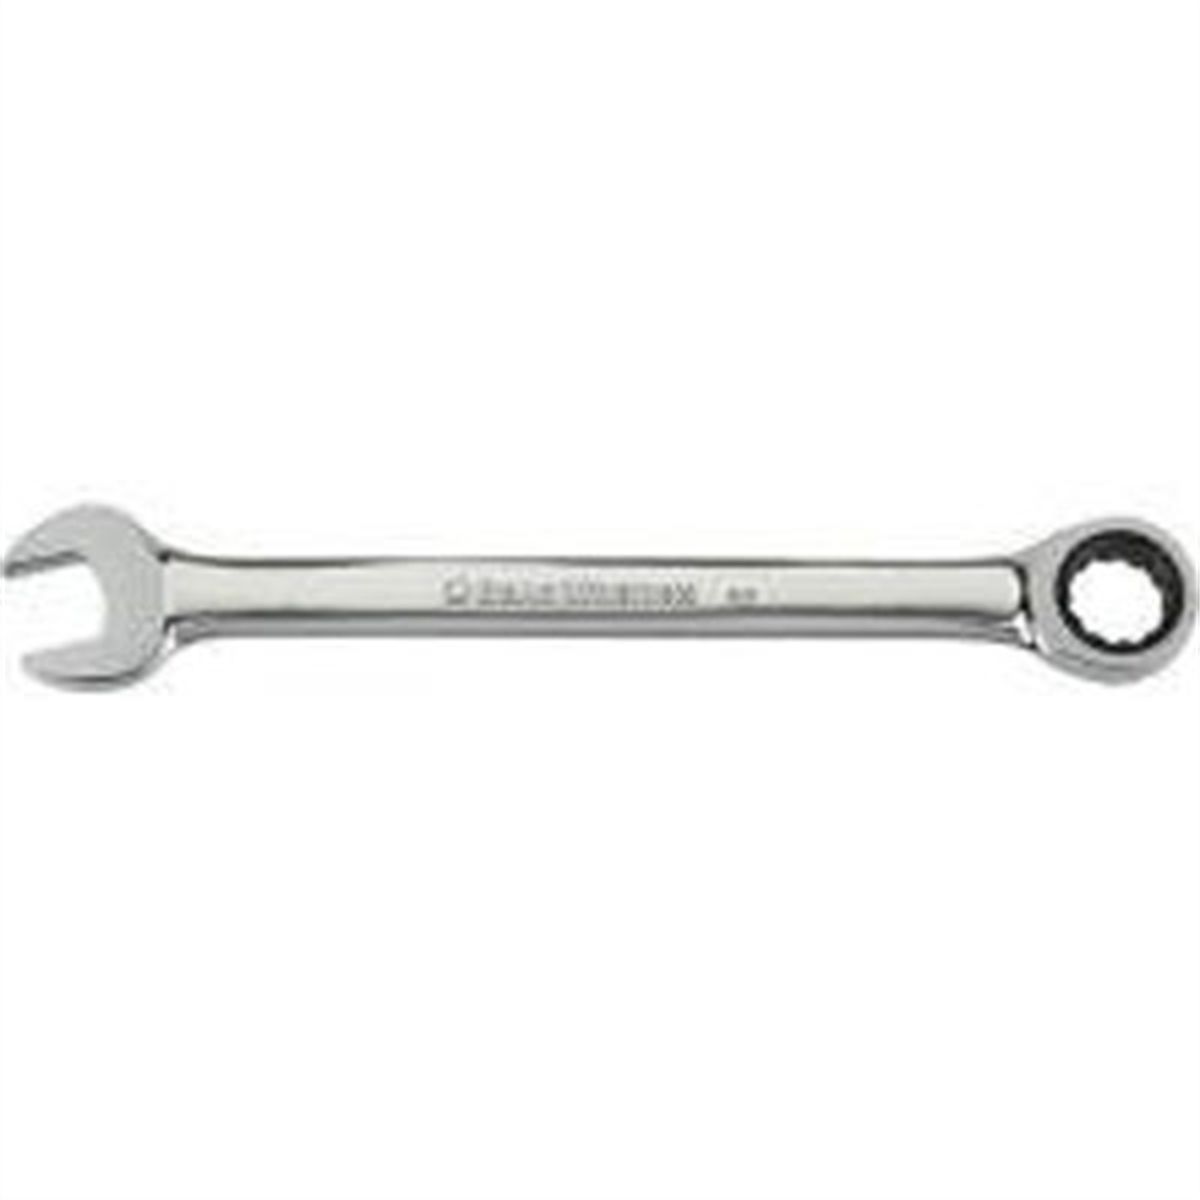 Wrench Ratcheting Combination - 11mm Gearwrench